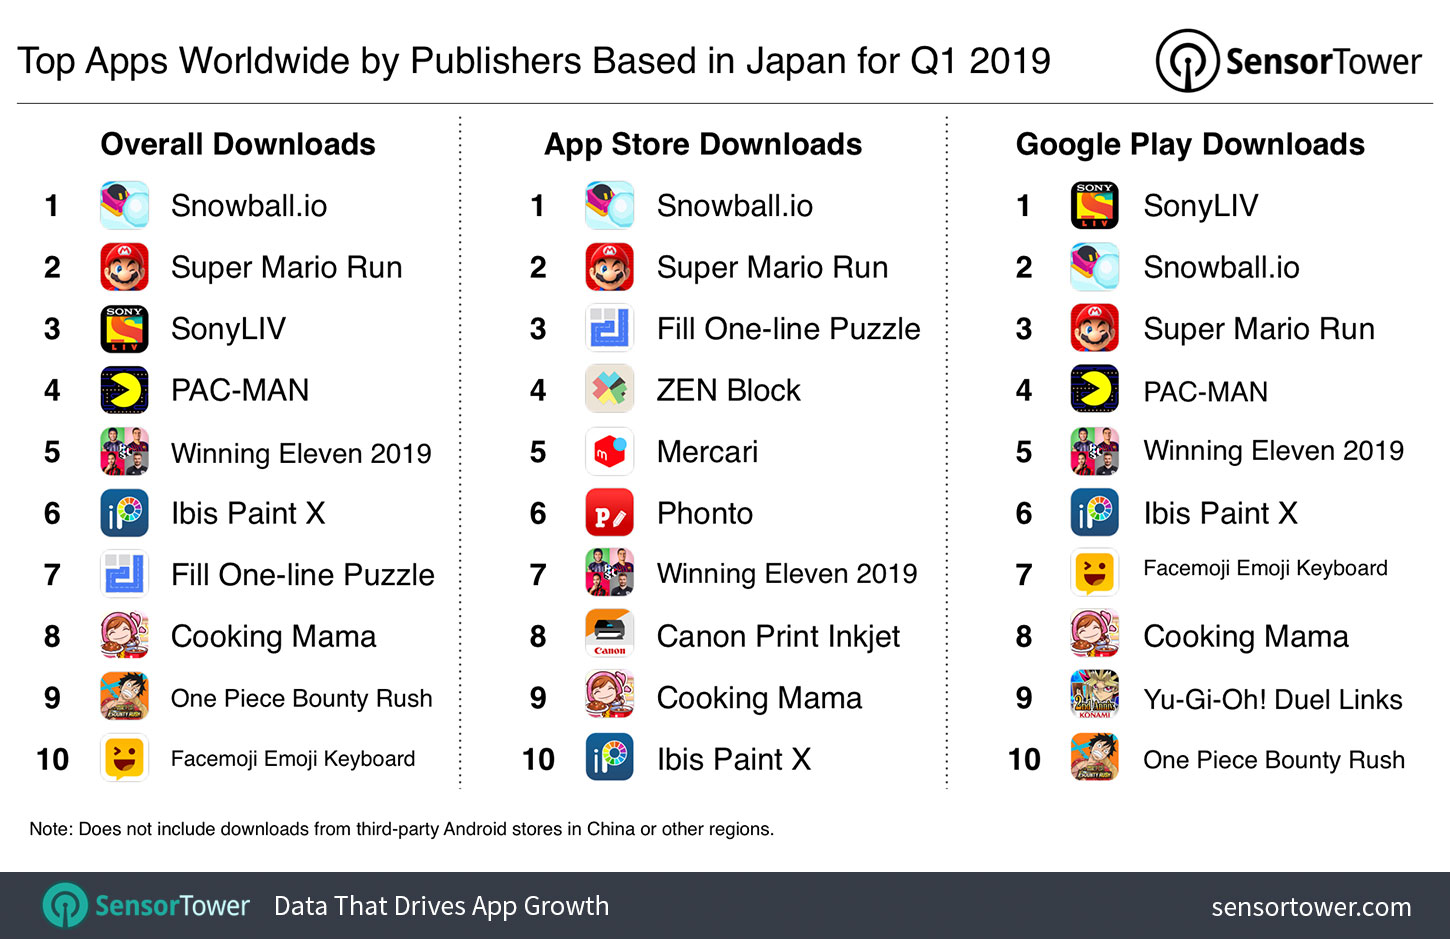 Top Apps Worldwide by Publishers based in Japan for Q1 2019